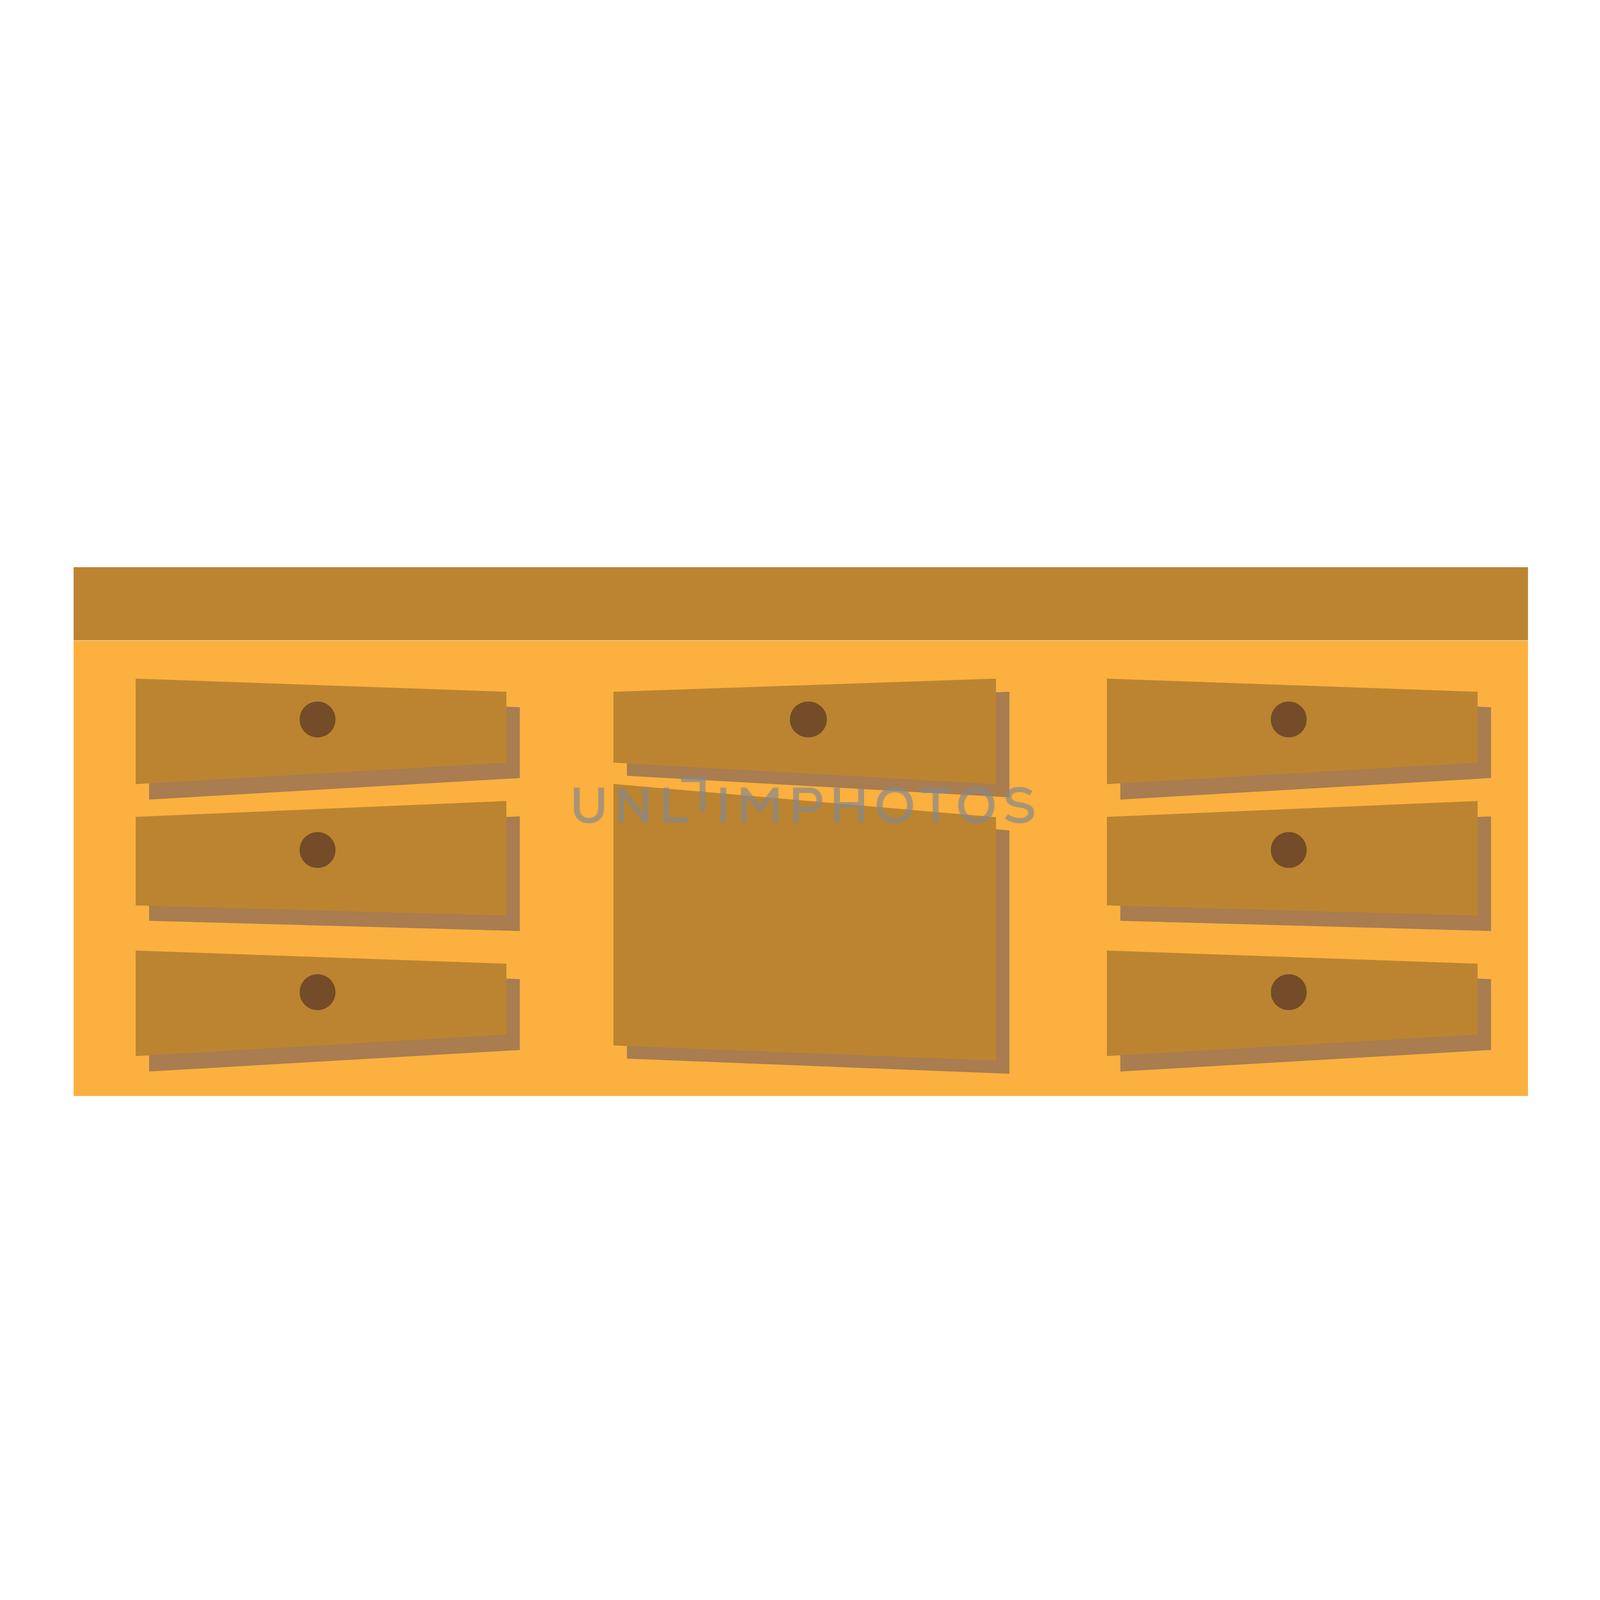 Cabinet icon flat vector illustration. Kitchen cabinets in brown color on white background